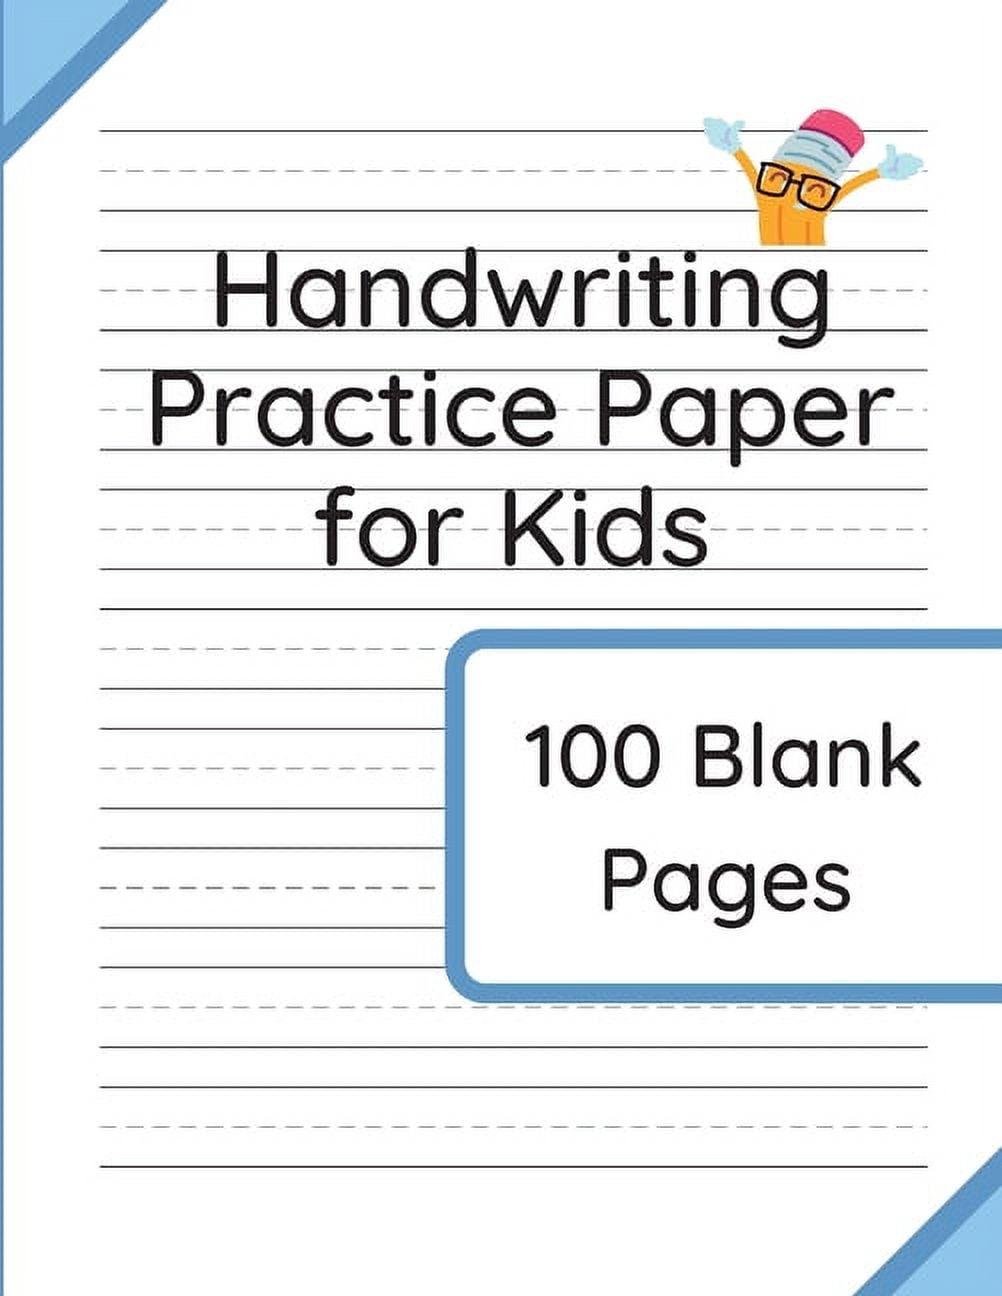 Handwriting Practice Paper for Kids: 100 Blank Pages of